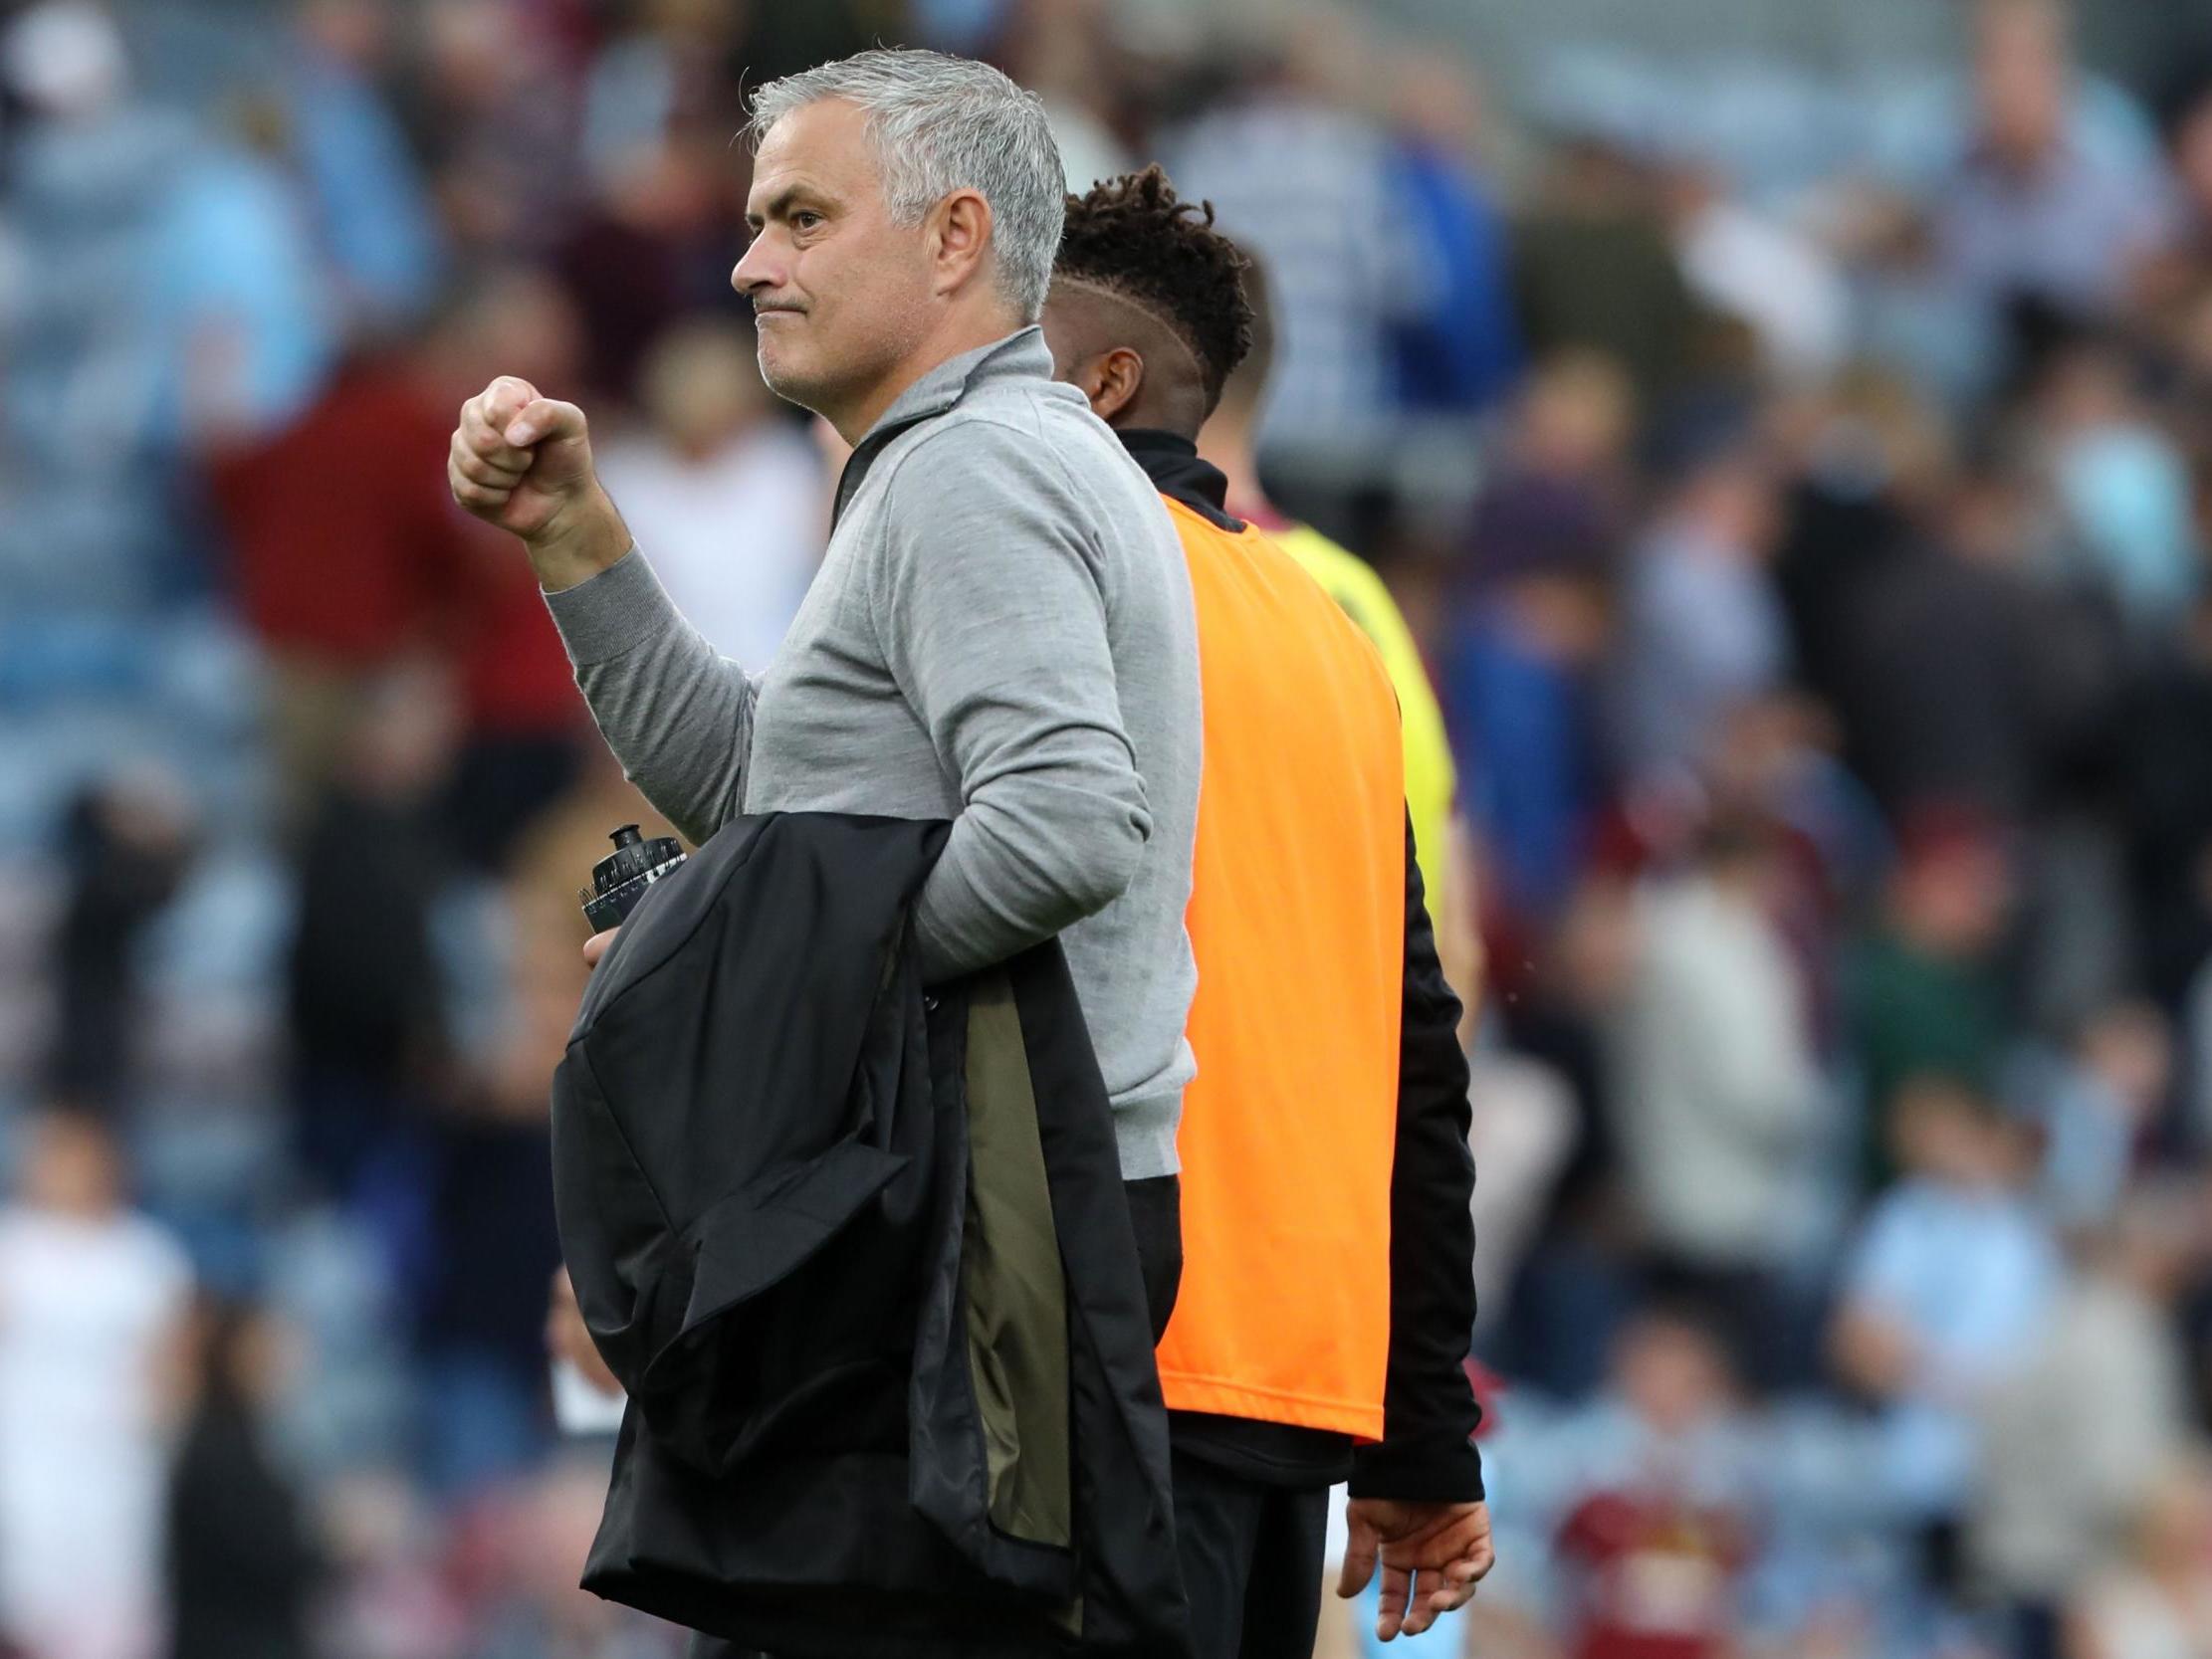 The win over Burnley eased the pressure on Mourinho (AFP/Getty)